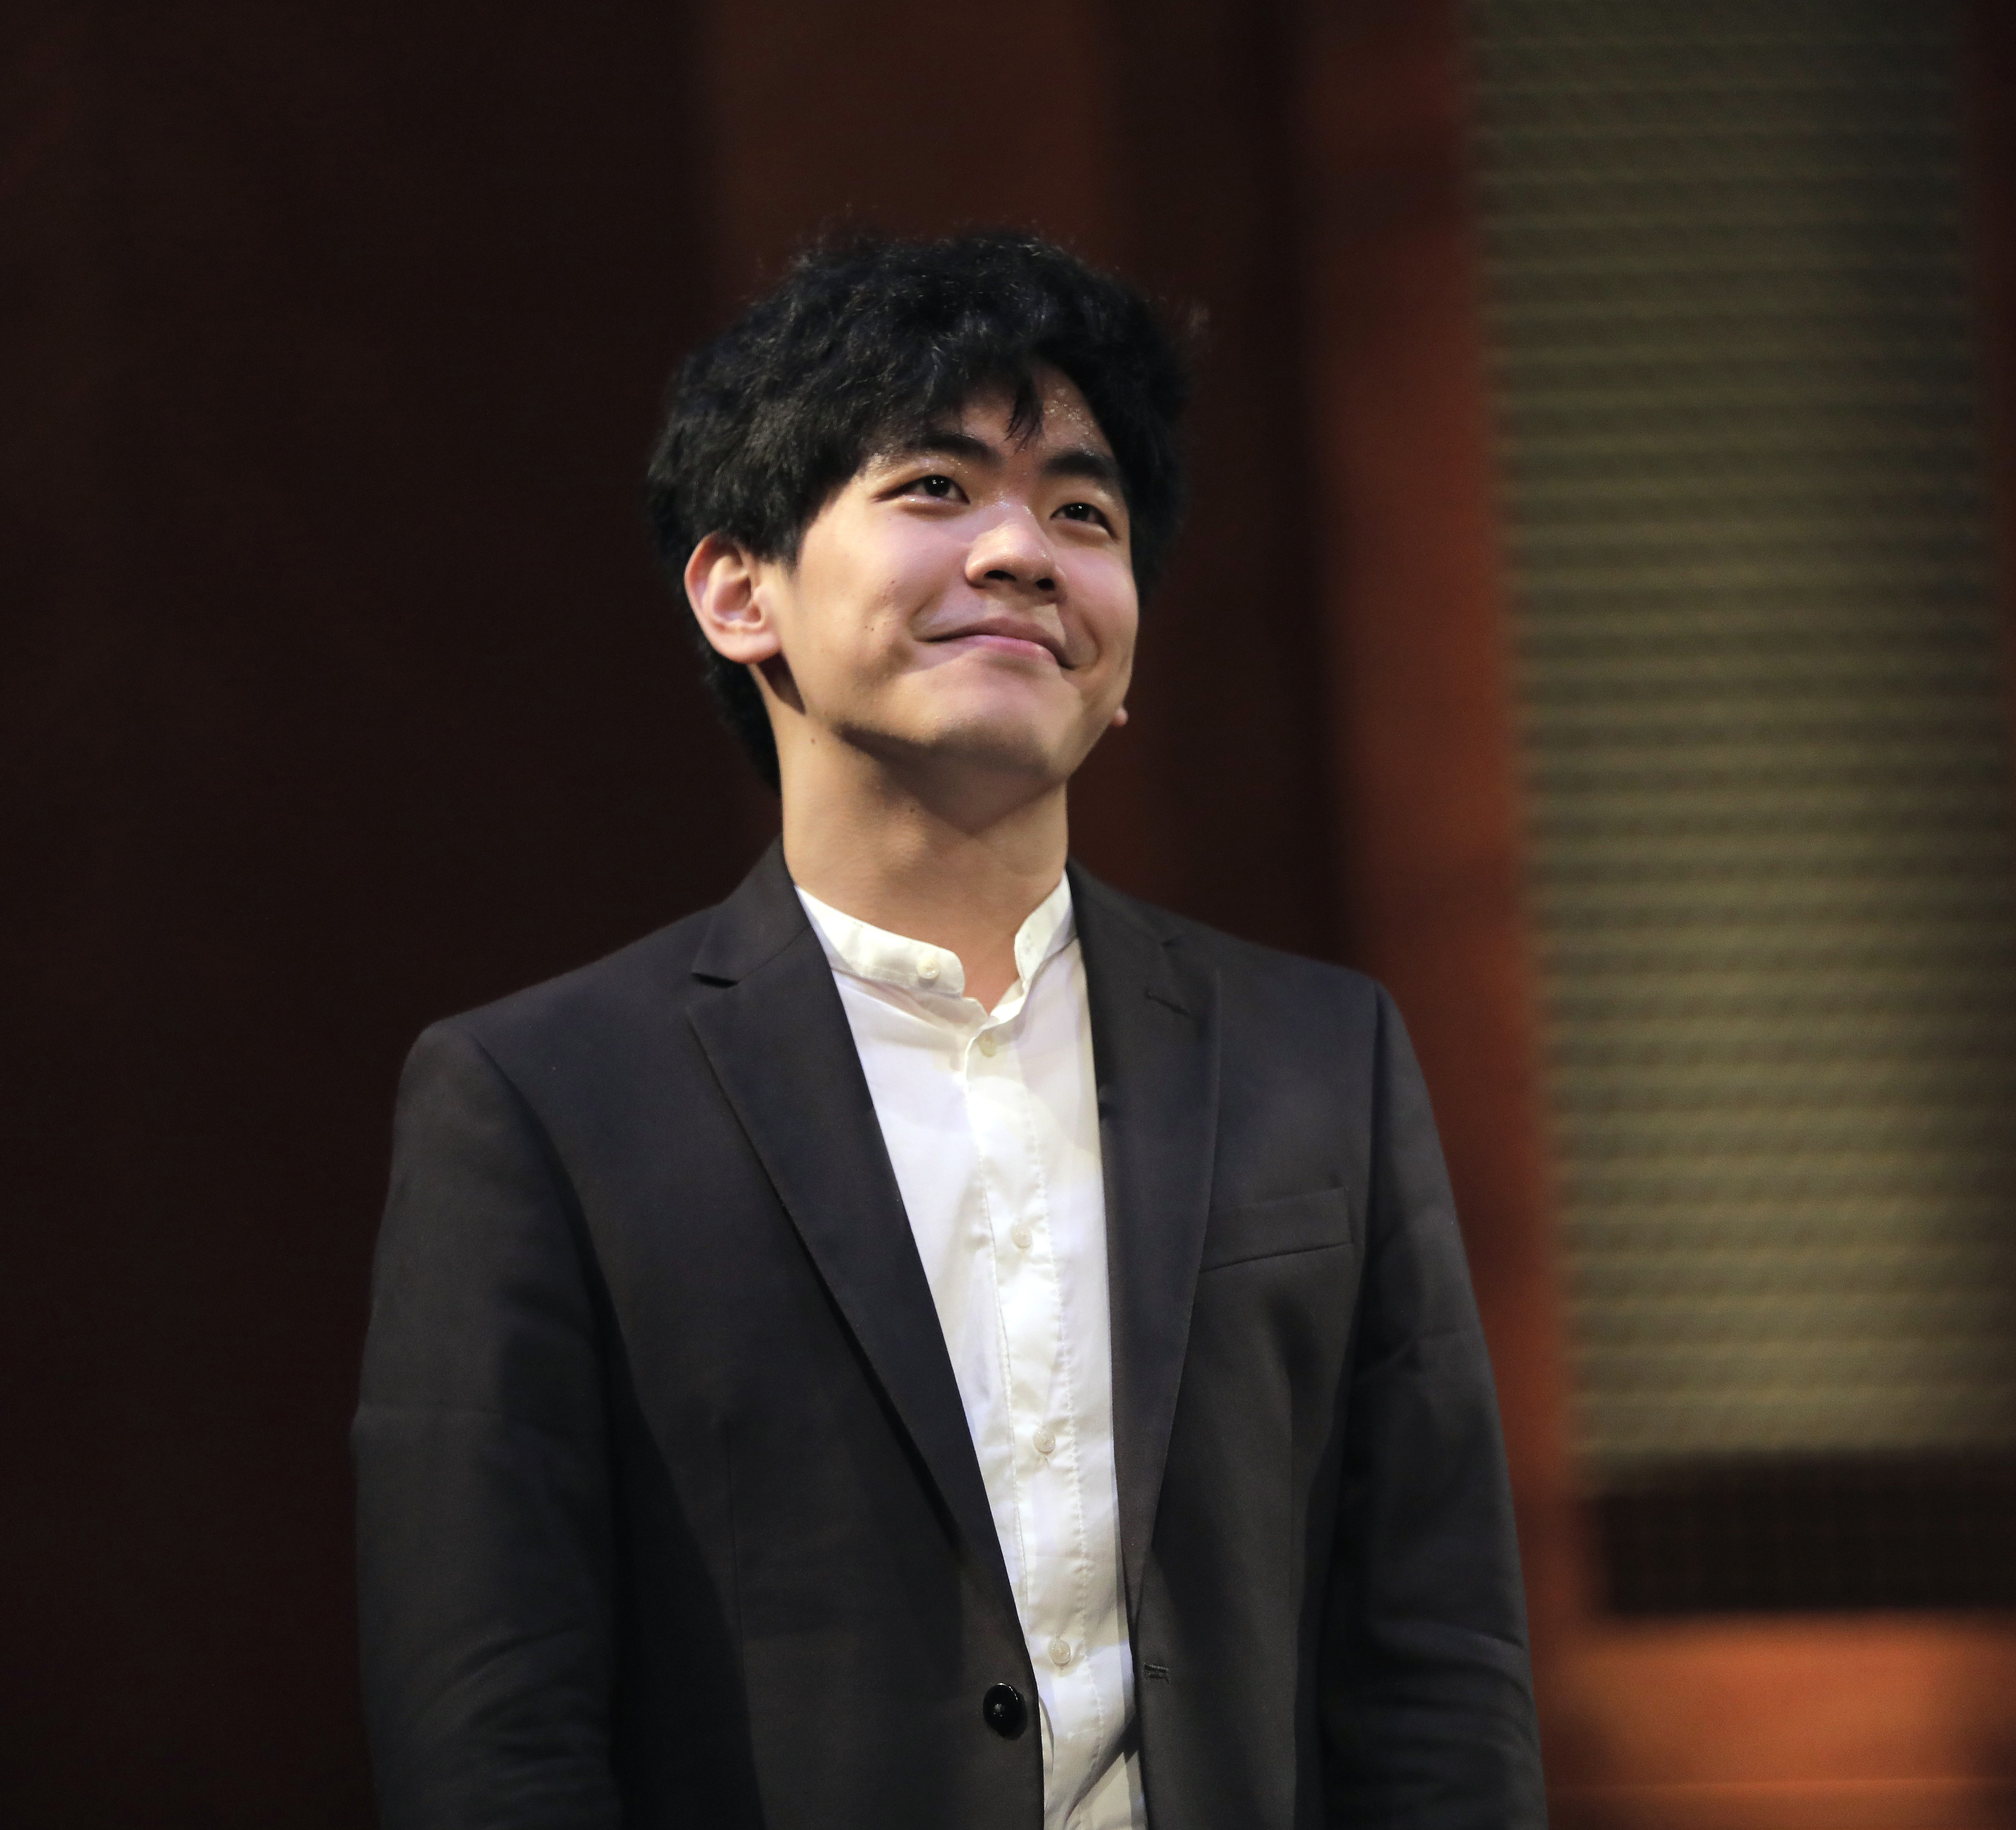 Pianist Daniel Hsu gazing up and afar with a happy closed-mouth smile